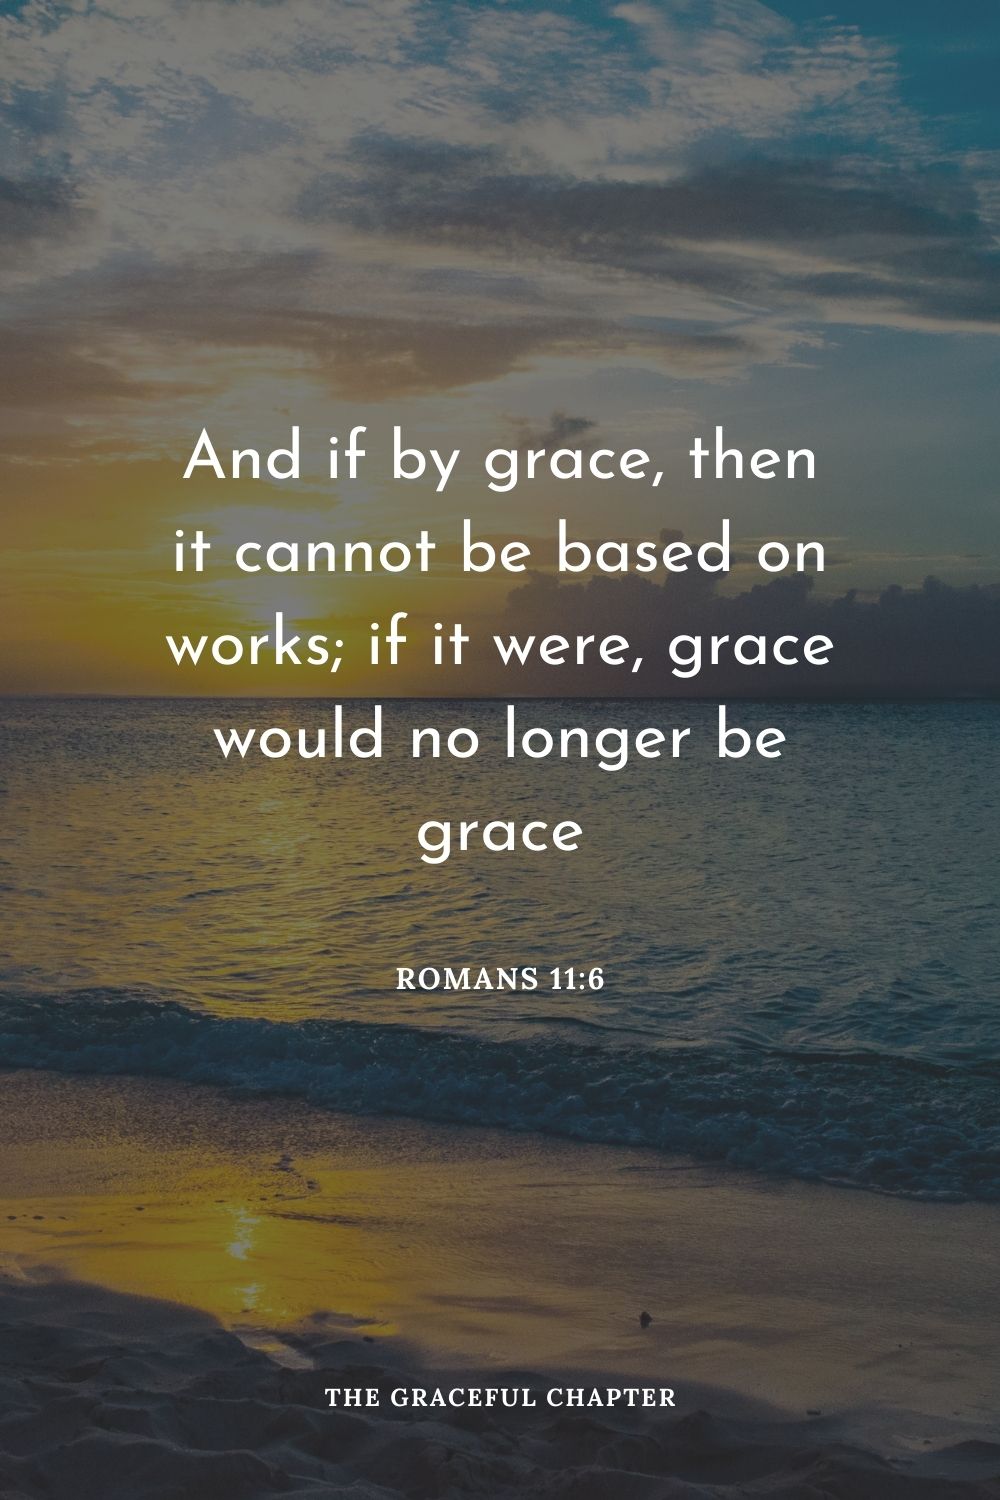 And if by grace, then it cannot be based on works; if it were, grace would no longer be grace Romans 11:6